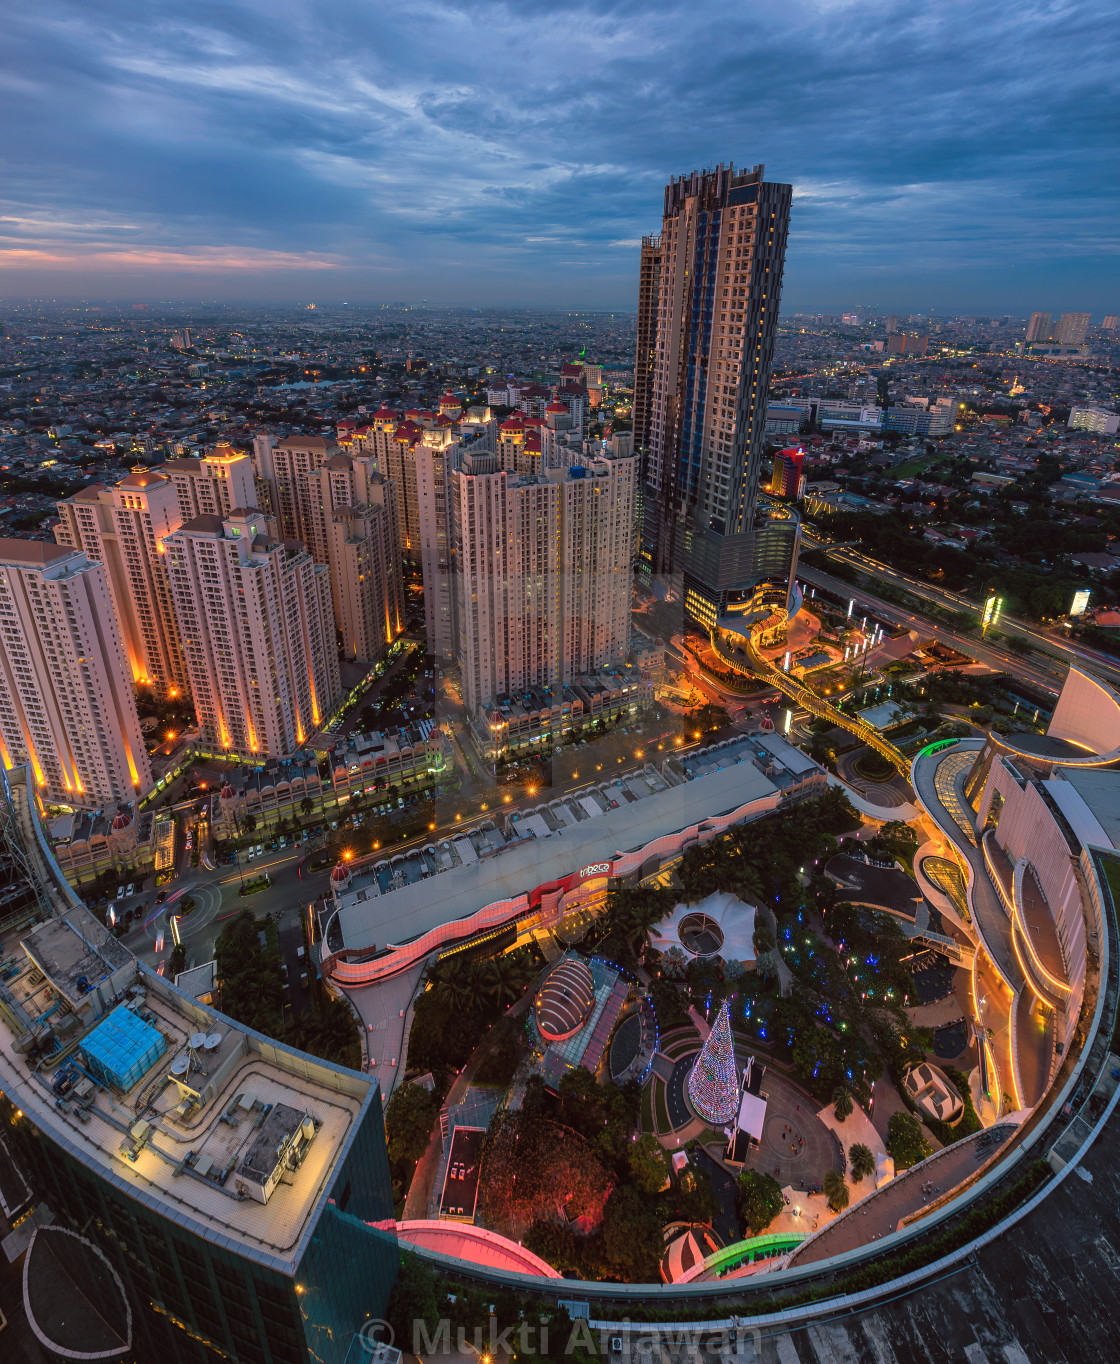 Jakarta: Central Park Mall Complex I - License, download or print for £